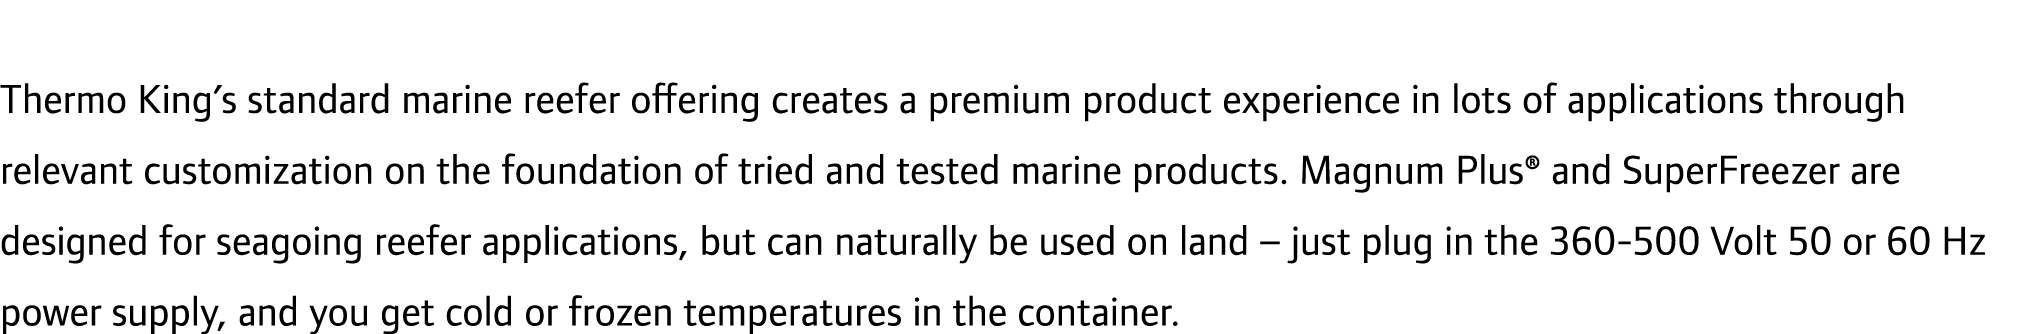 Thermo King’s standard marine reefer offering creates a premium product experience in lots of applications through re...